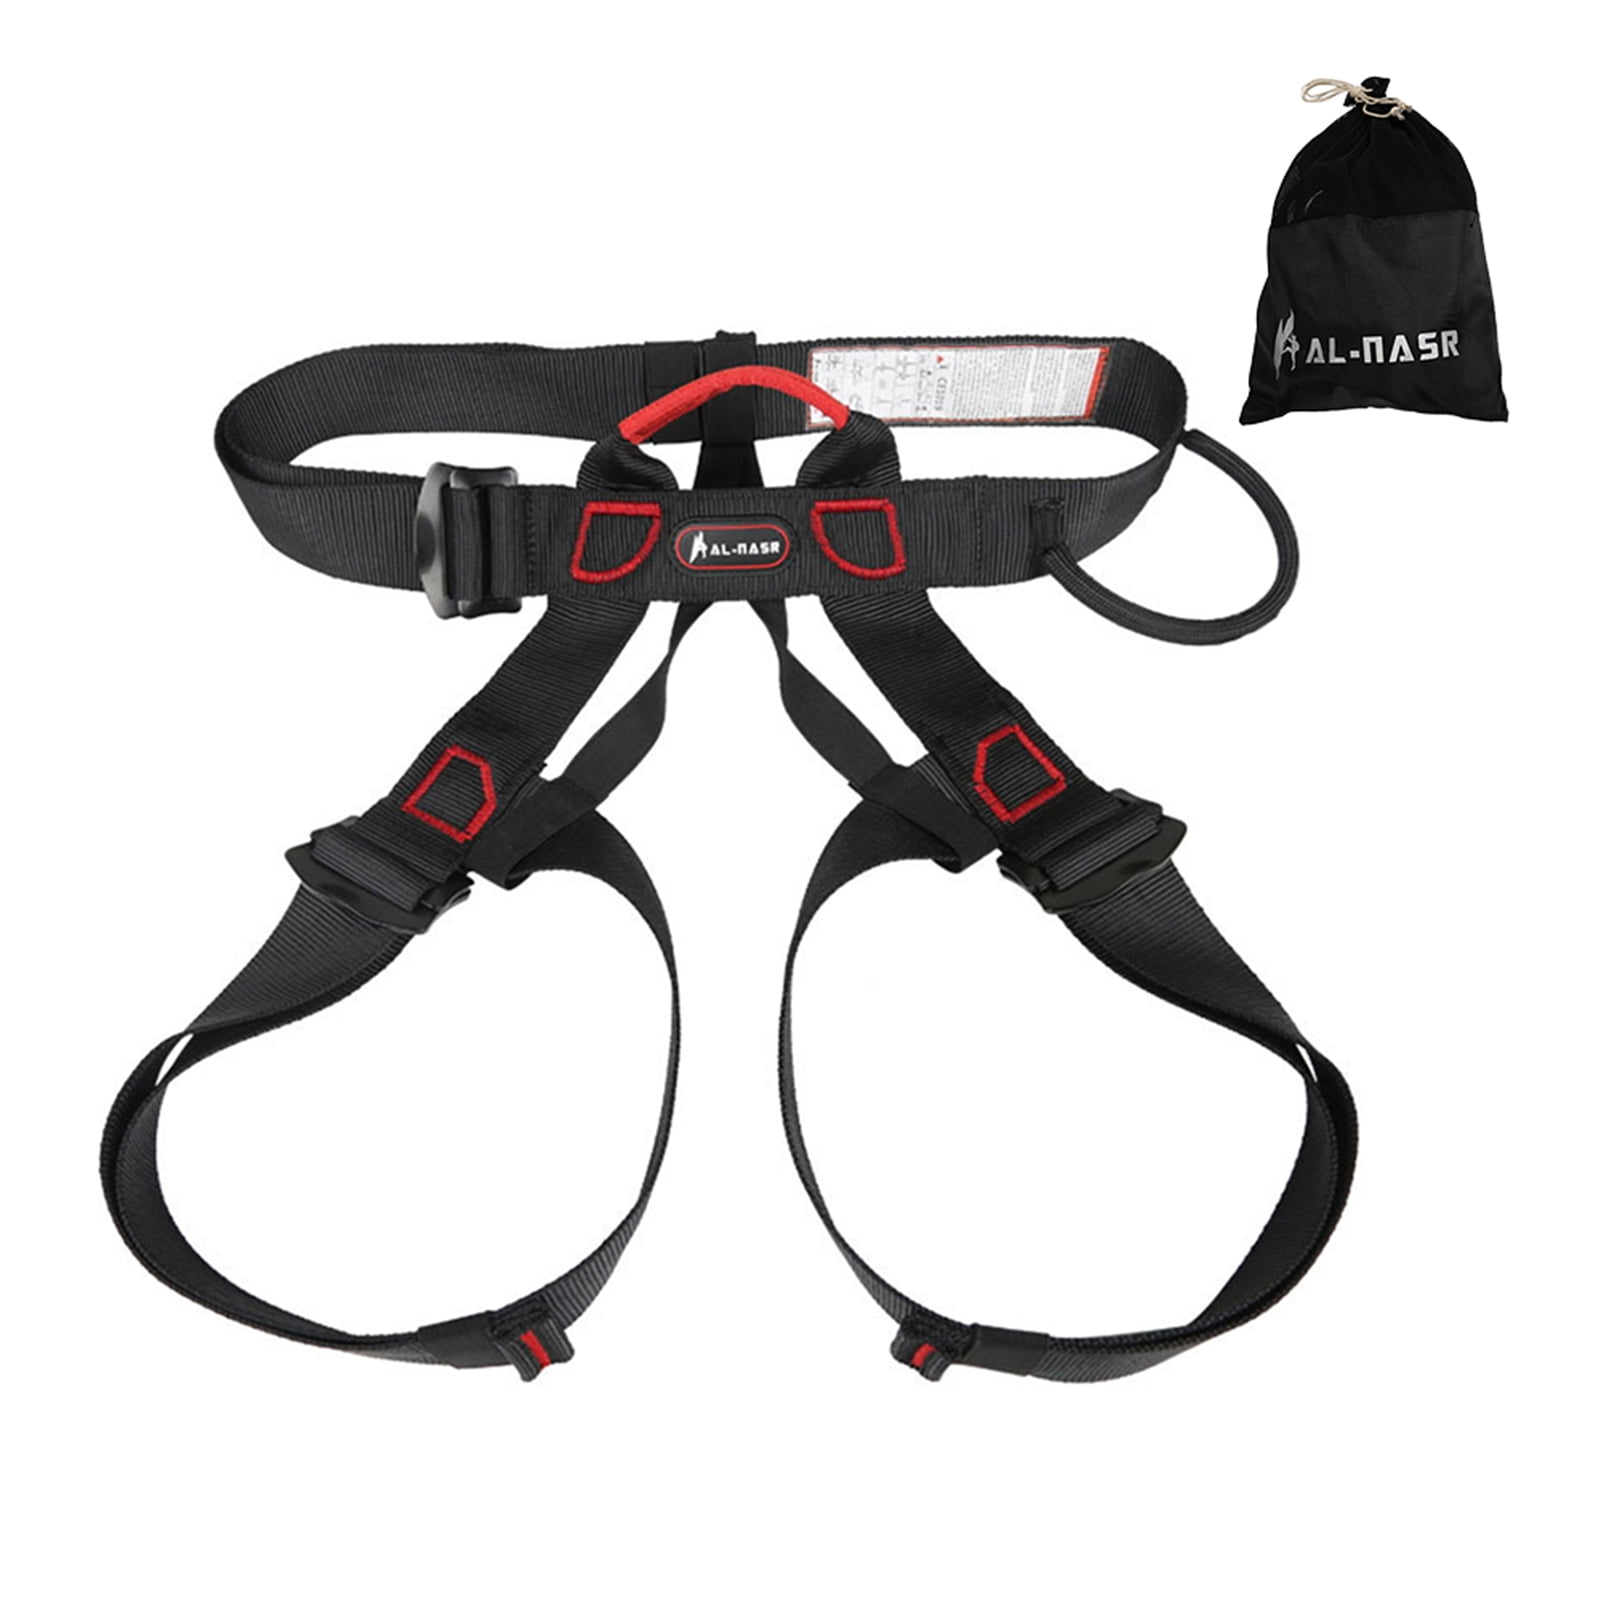 Thicken Strong Seat Belt Climbing Harness Body Guide Rock Rappelling Equipment 